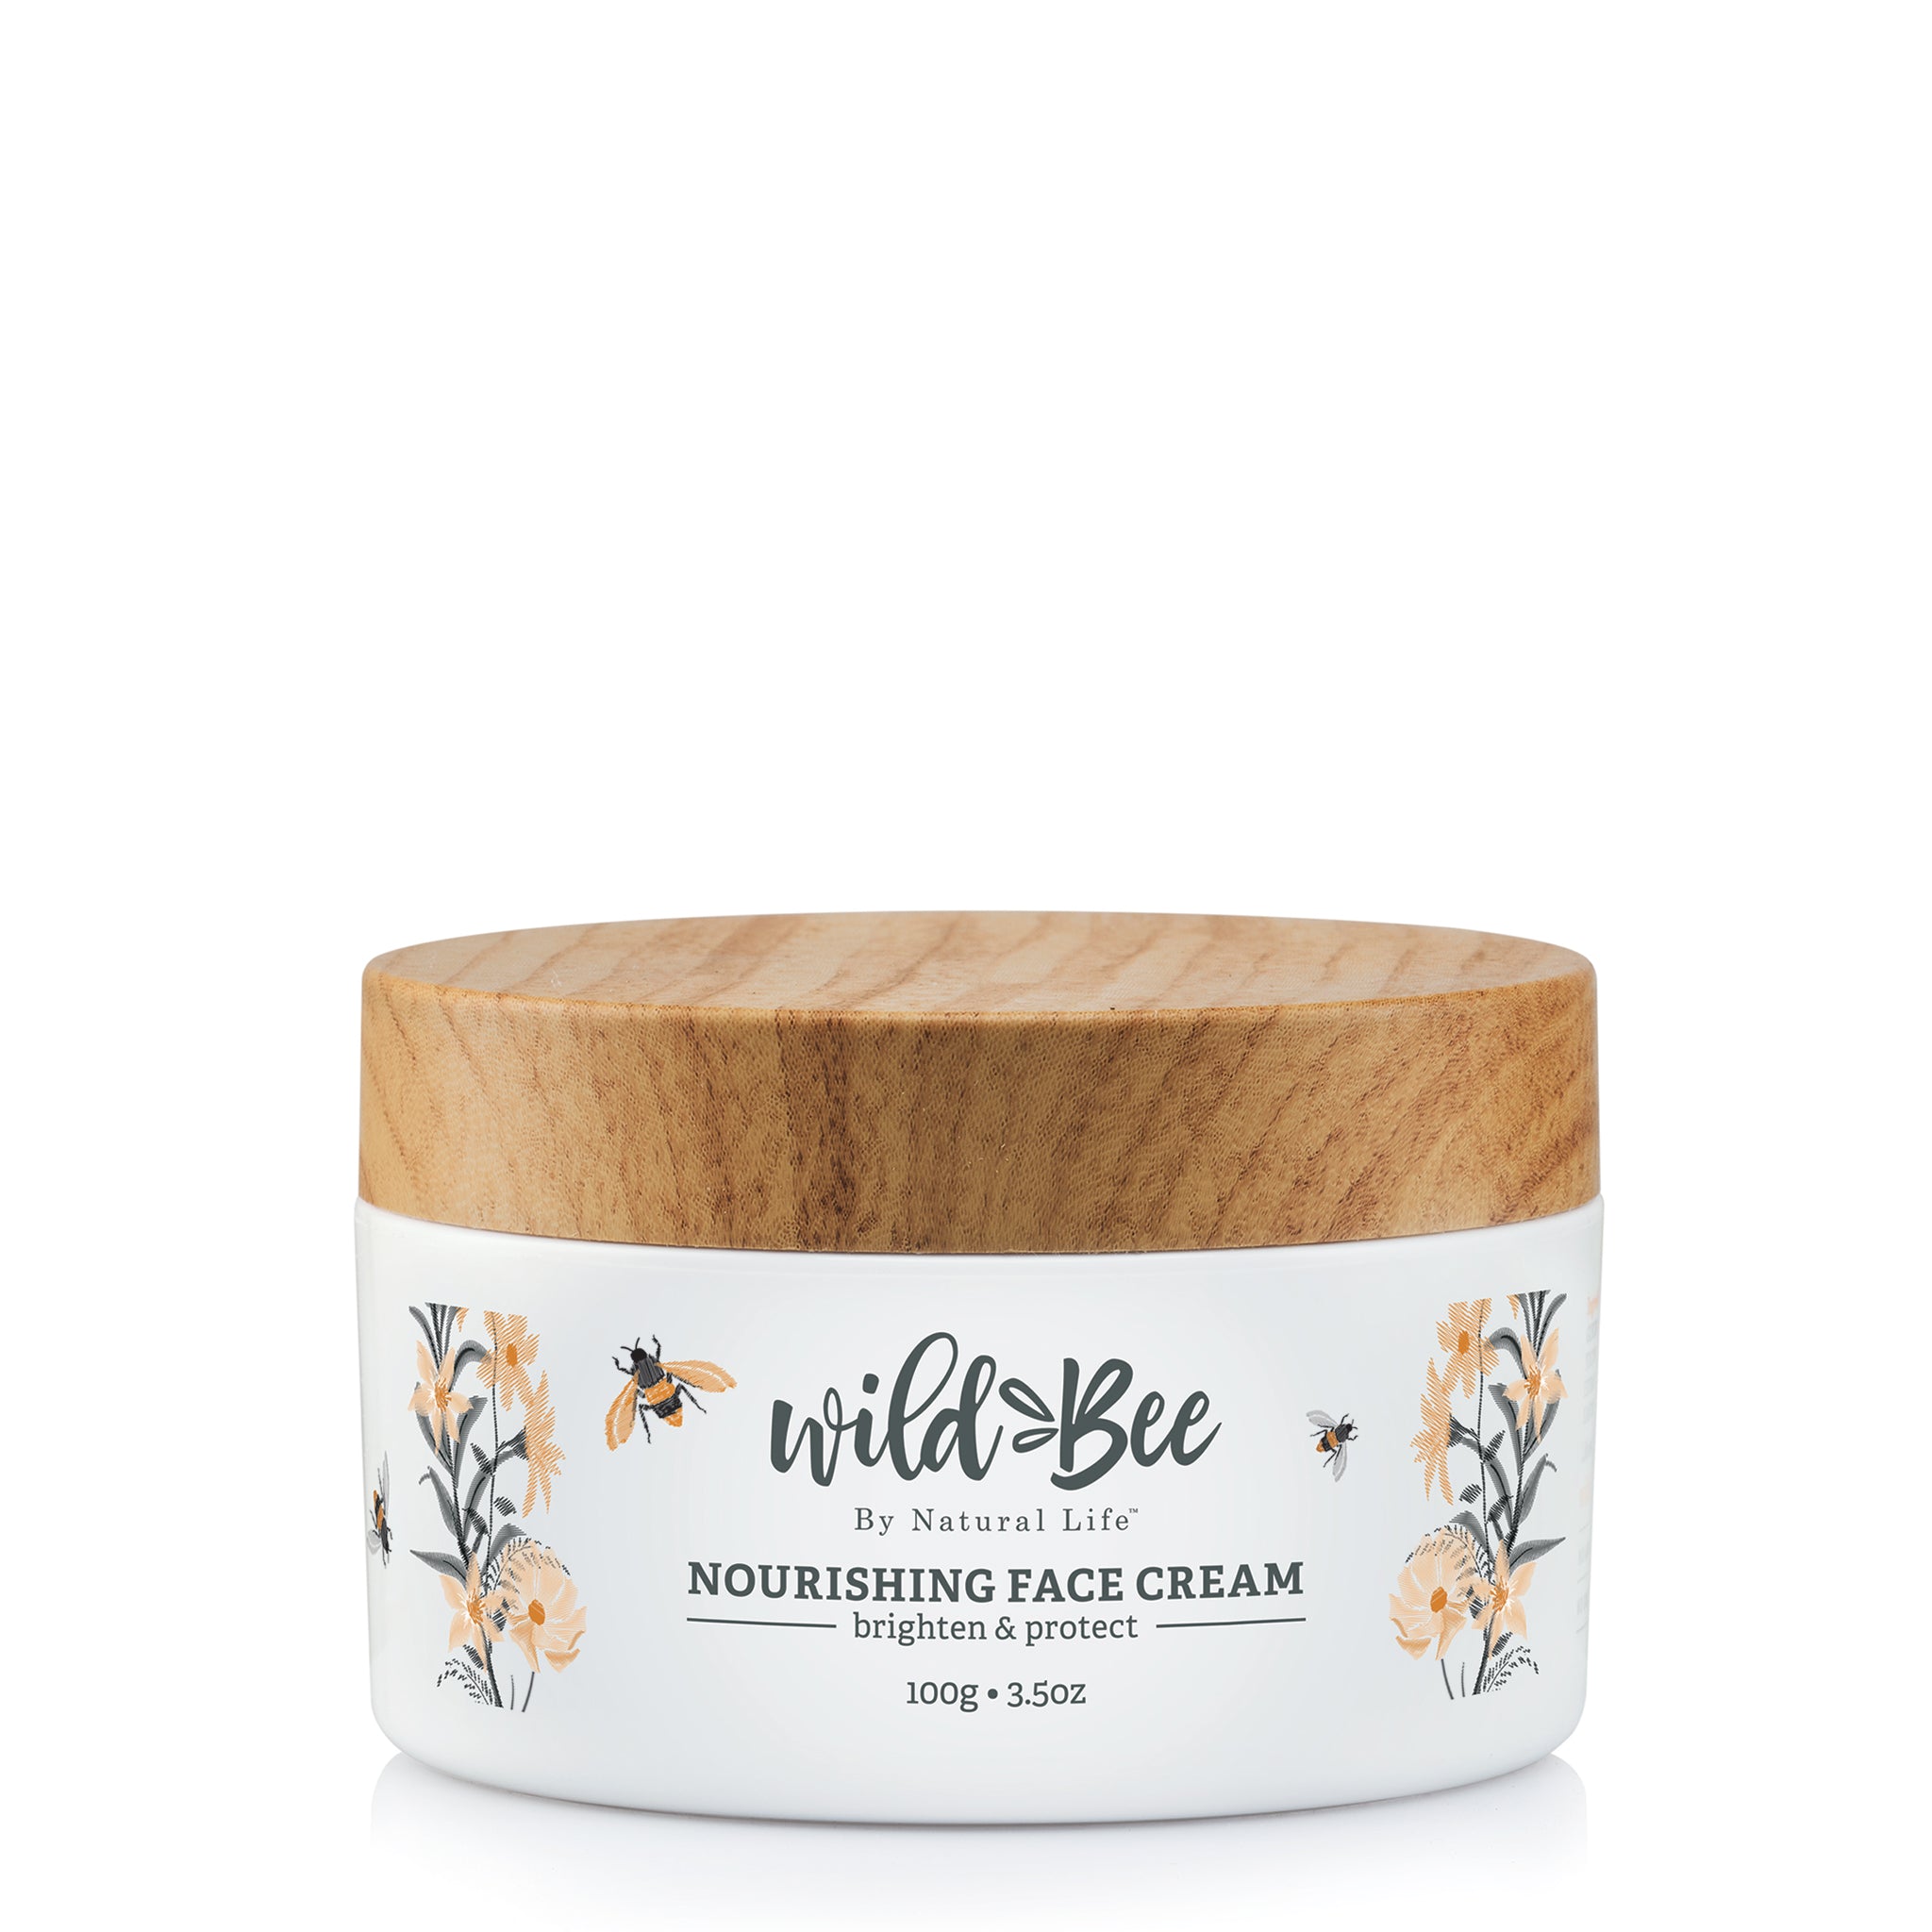 Wild Bee by Natural Life Nourishing Face Cream